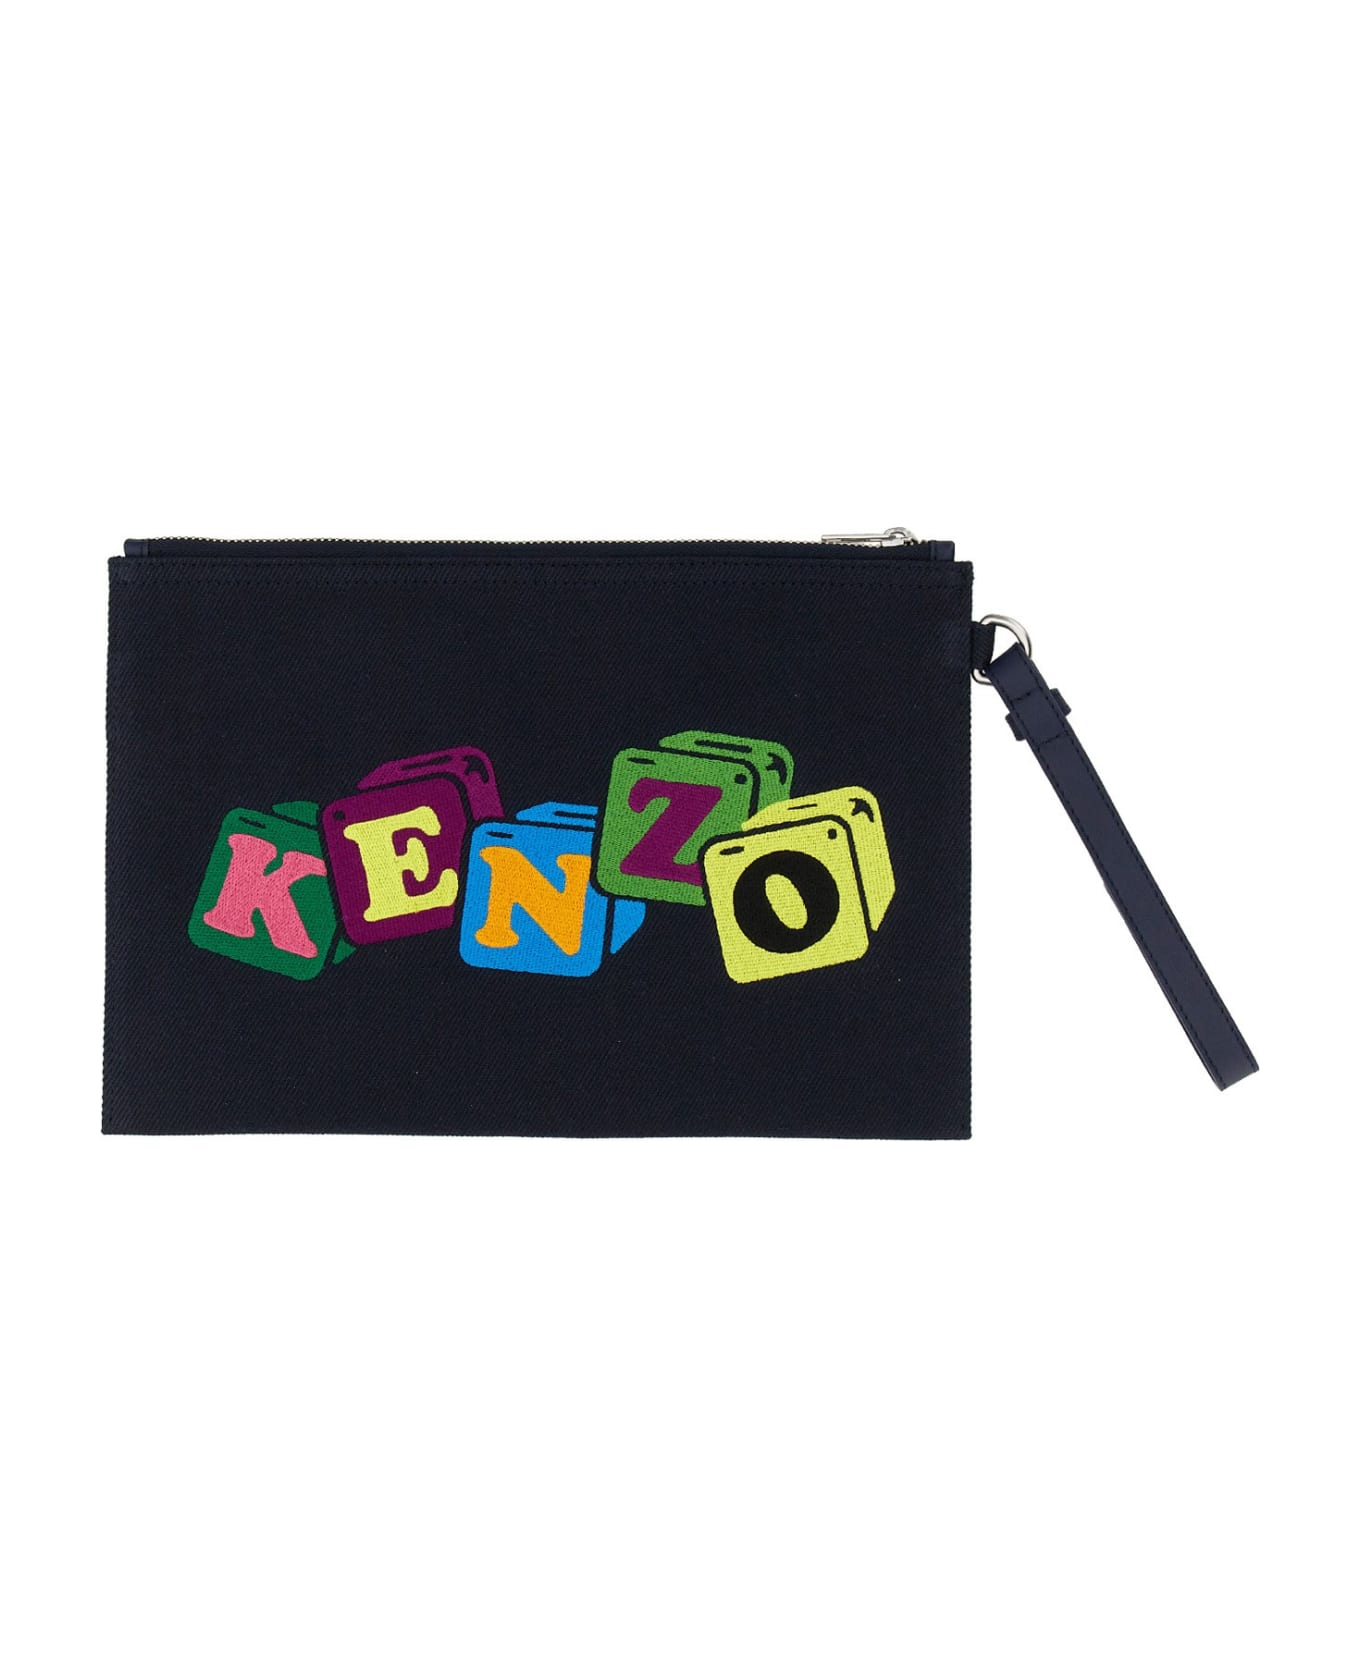 Kenzo Clutch With Embroidery - Black